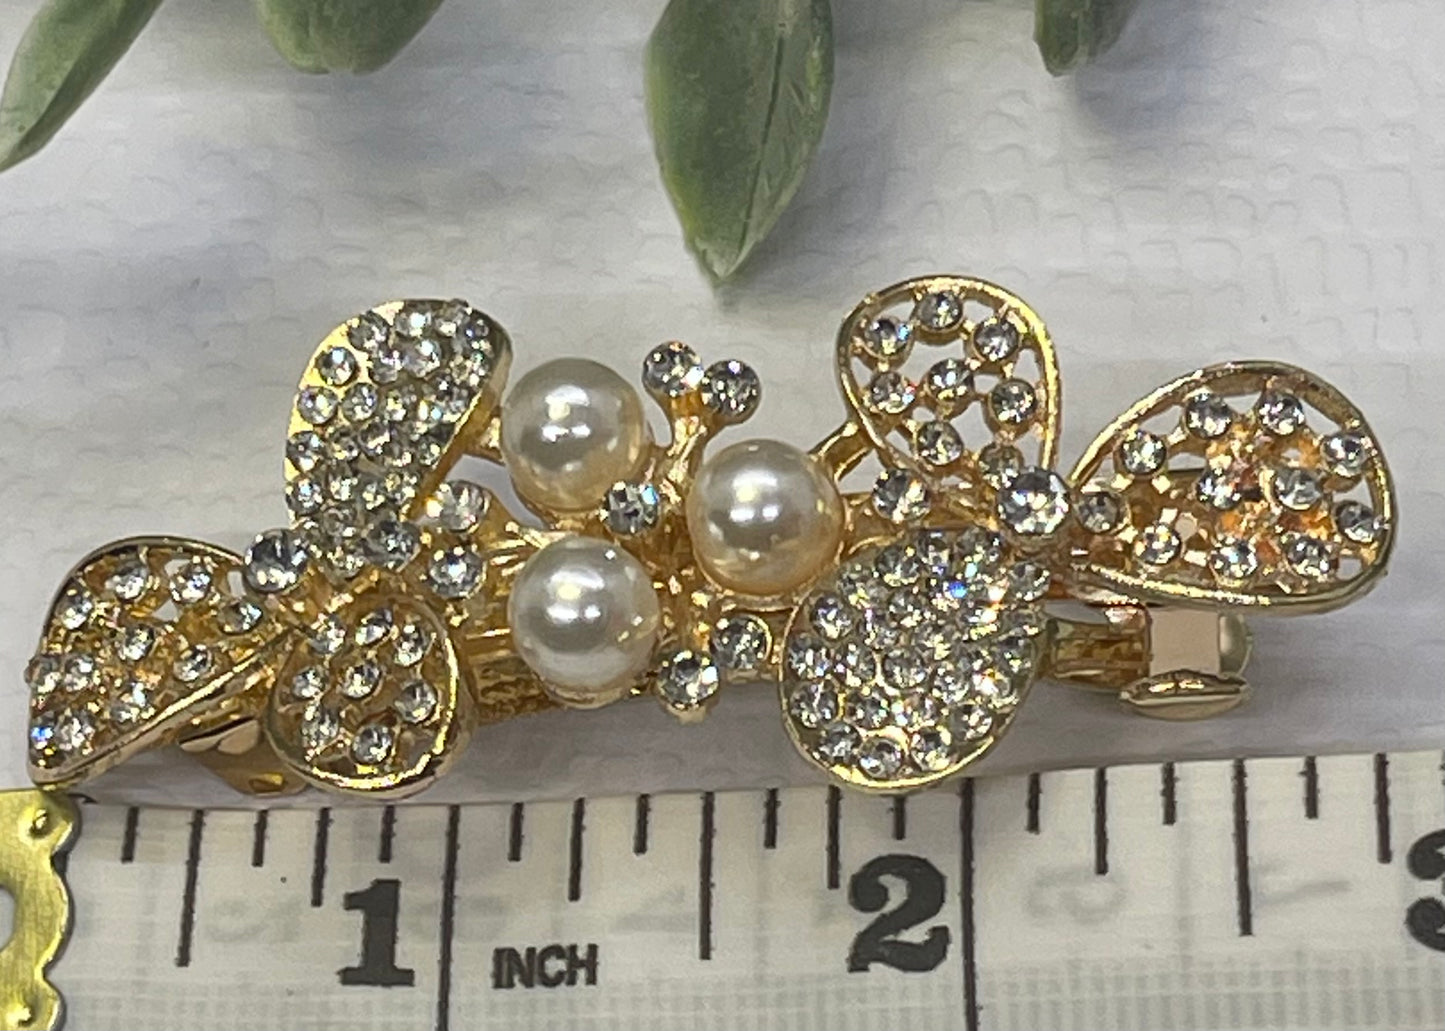 Pearl Crystal rhinestone barrette approximately 3.0” gold tone formal hair accessories gift wedding bridesmaid